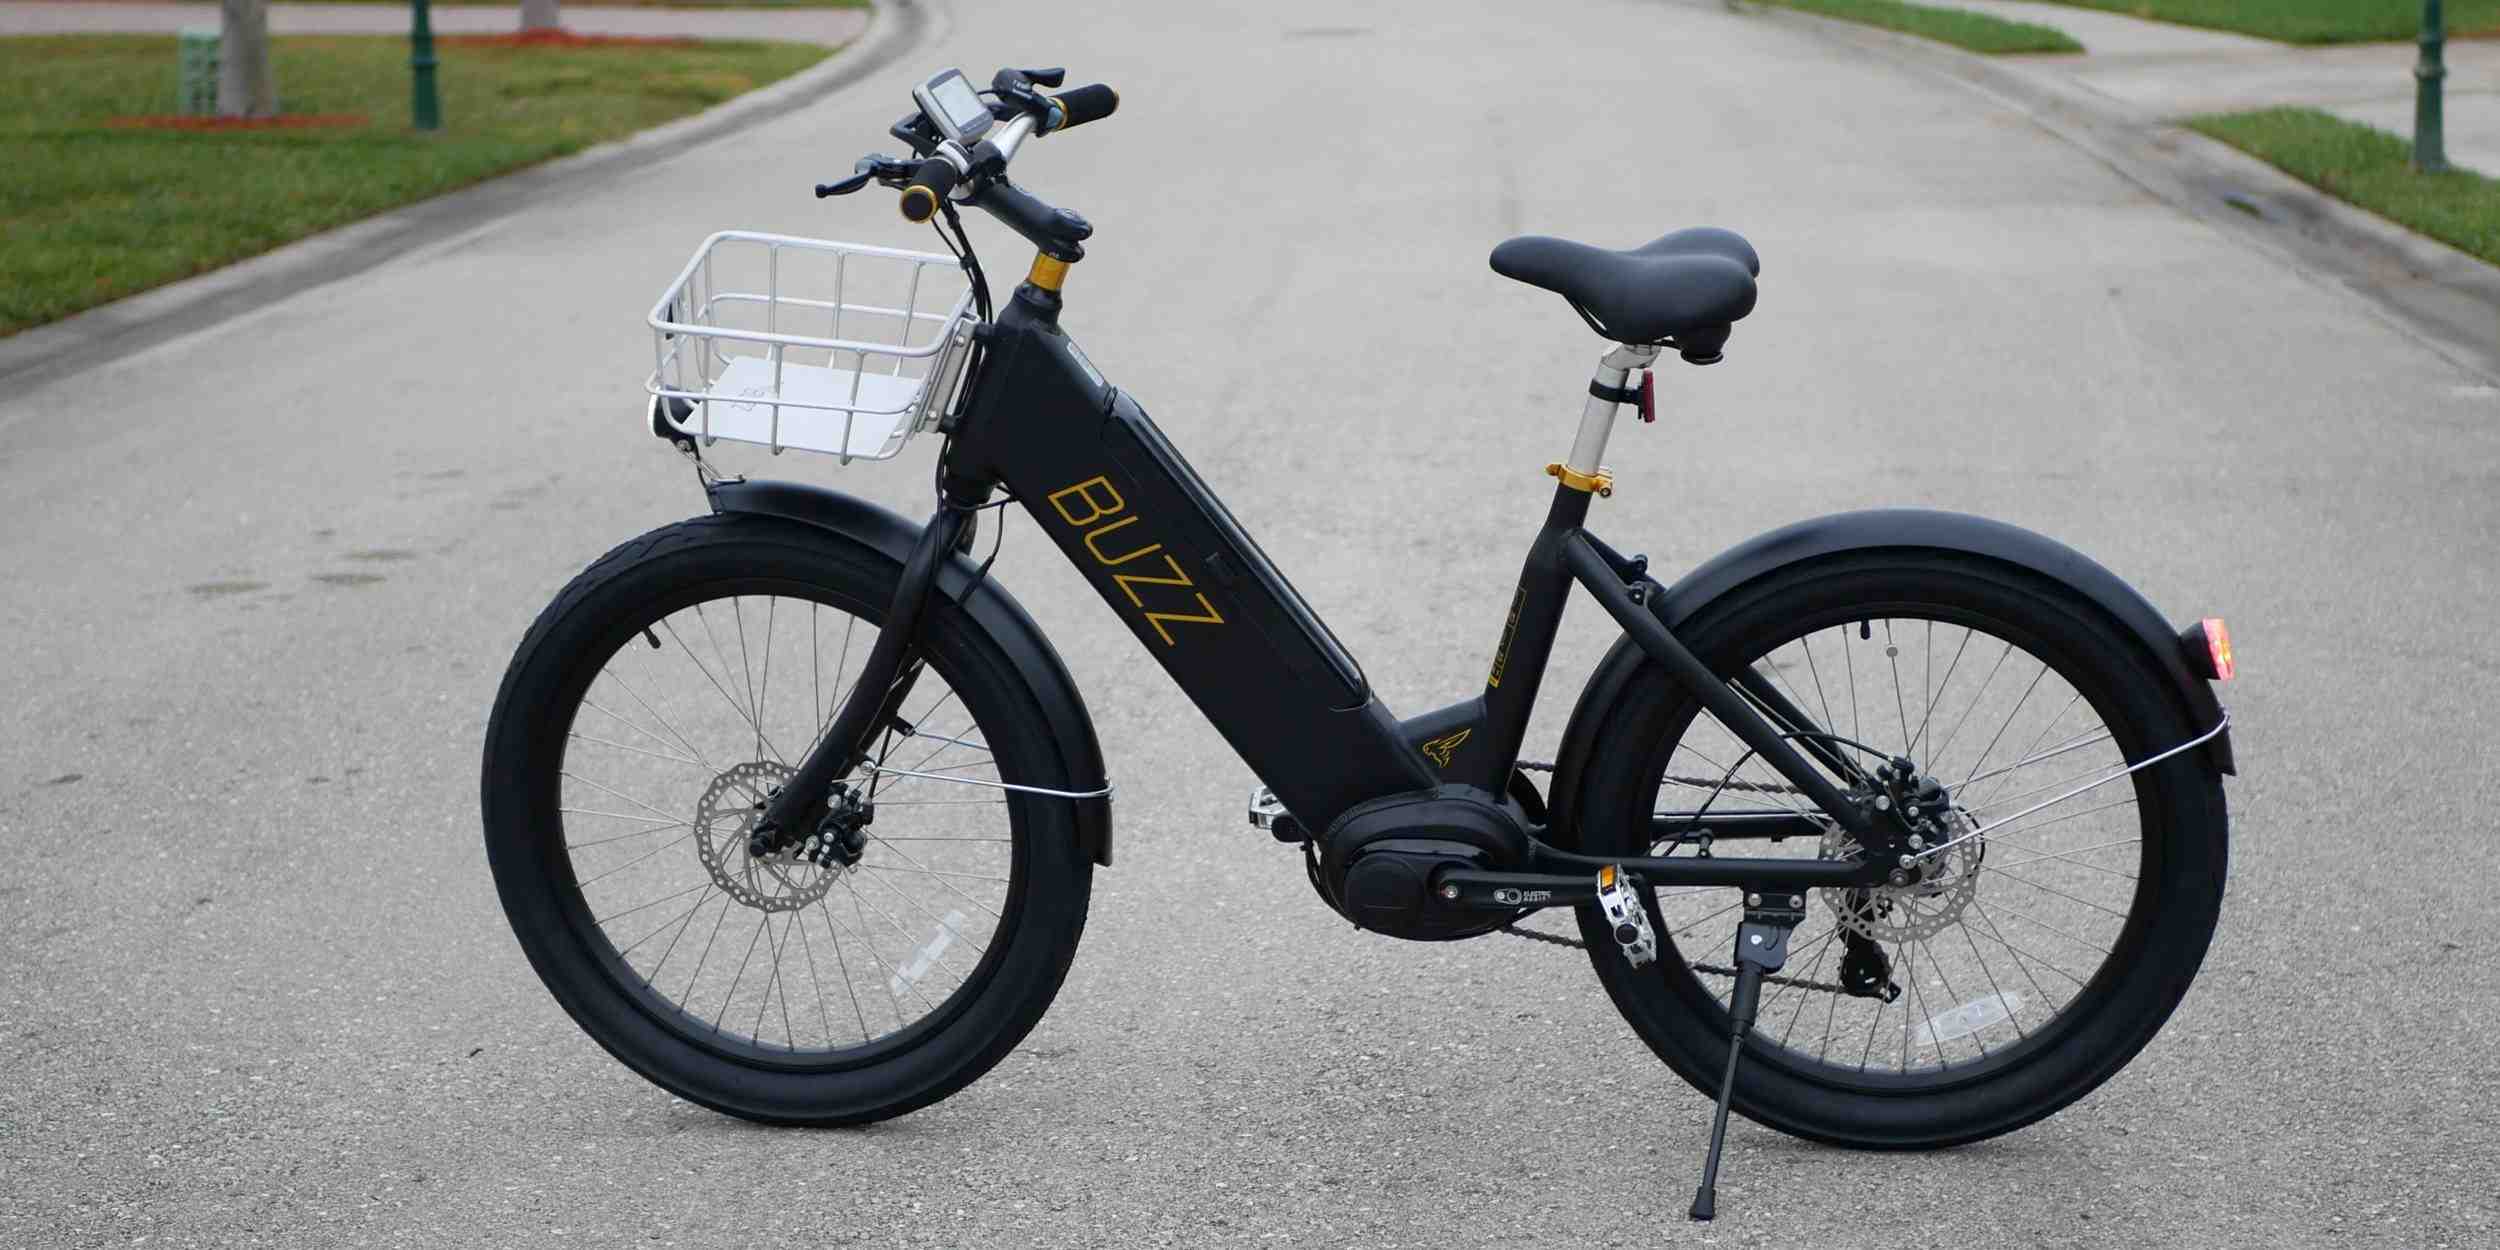 Do you still have to pedal an electric bike?